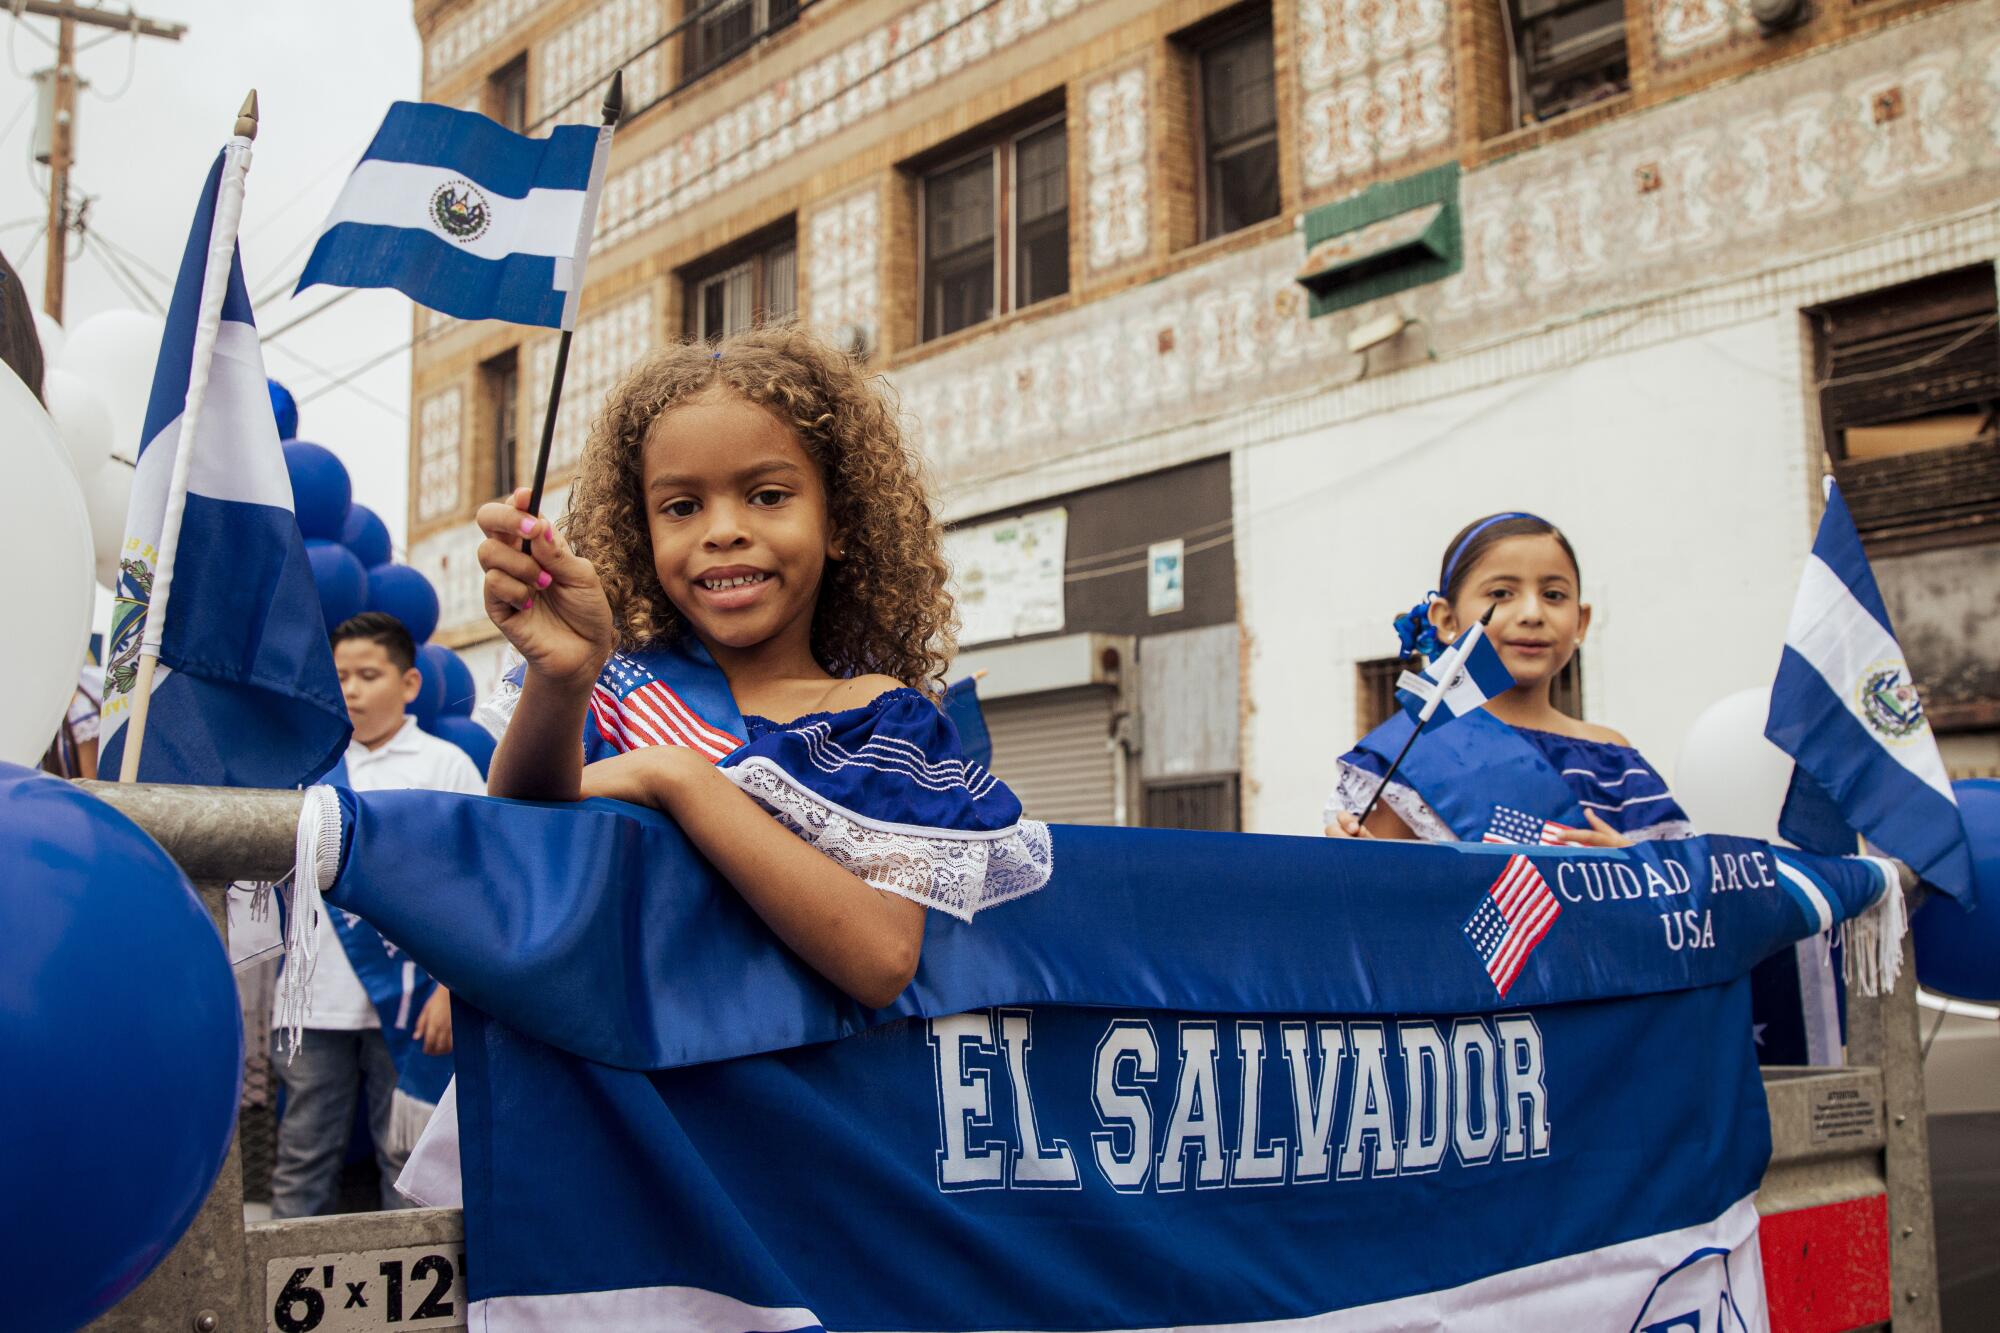 Two young girls stand on top of a float waving El Salvador flags